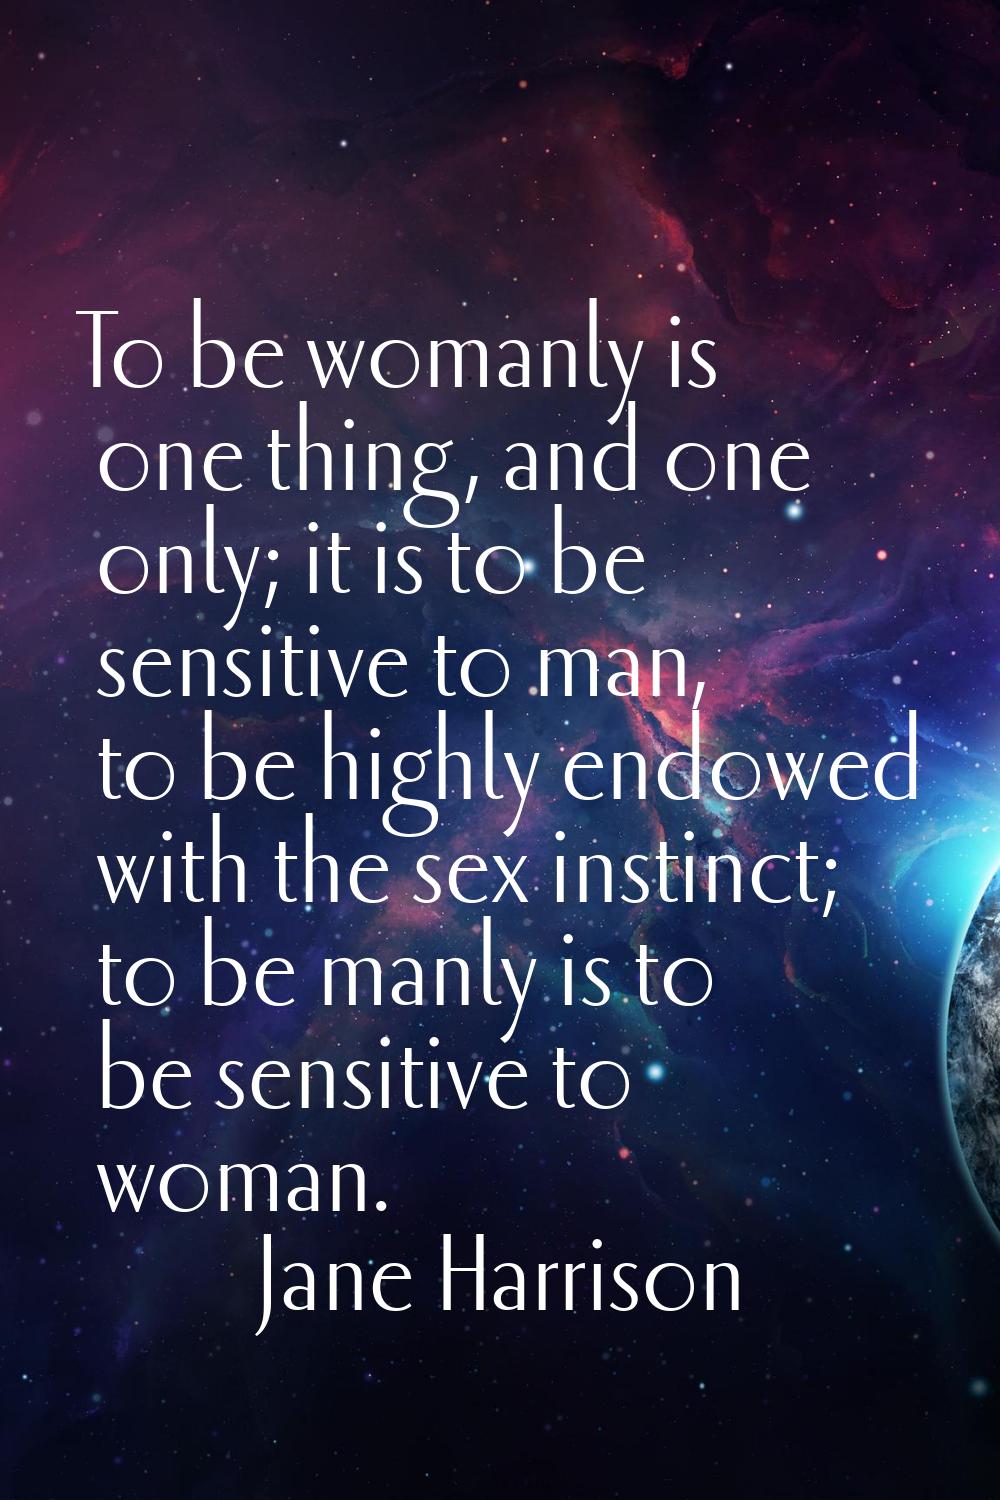 To be womanly is one thing, and one only; it is to be sensitive to man, to be highly endowed with t